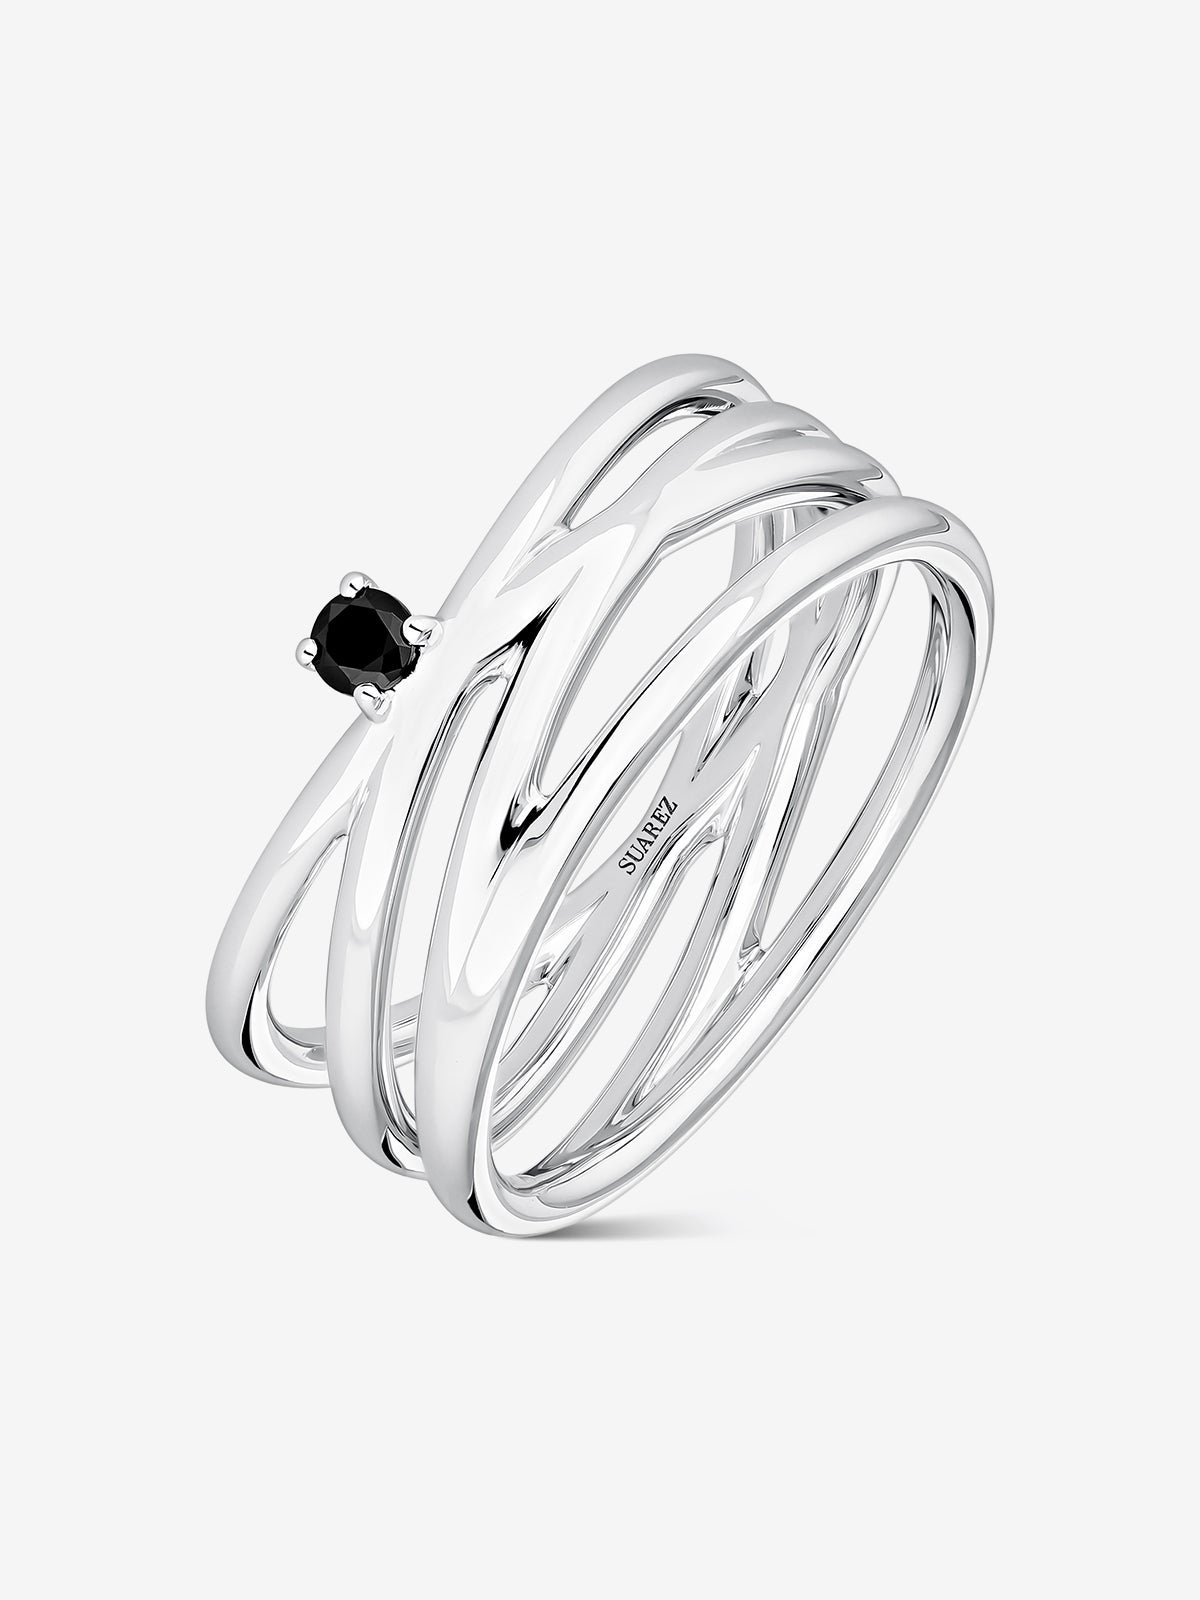 Cross multi-arm ring in 925 silver with brilliant-cut black spinel